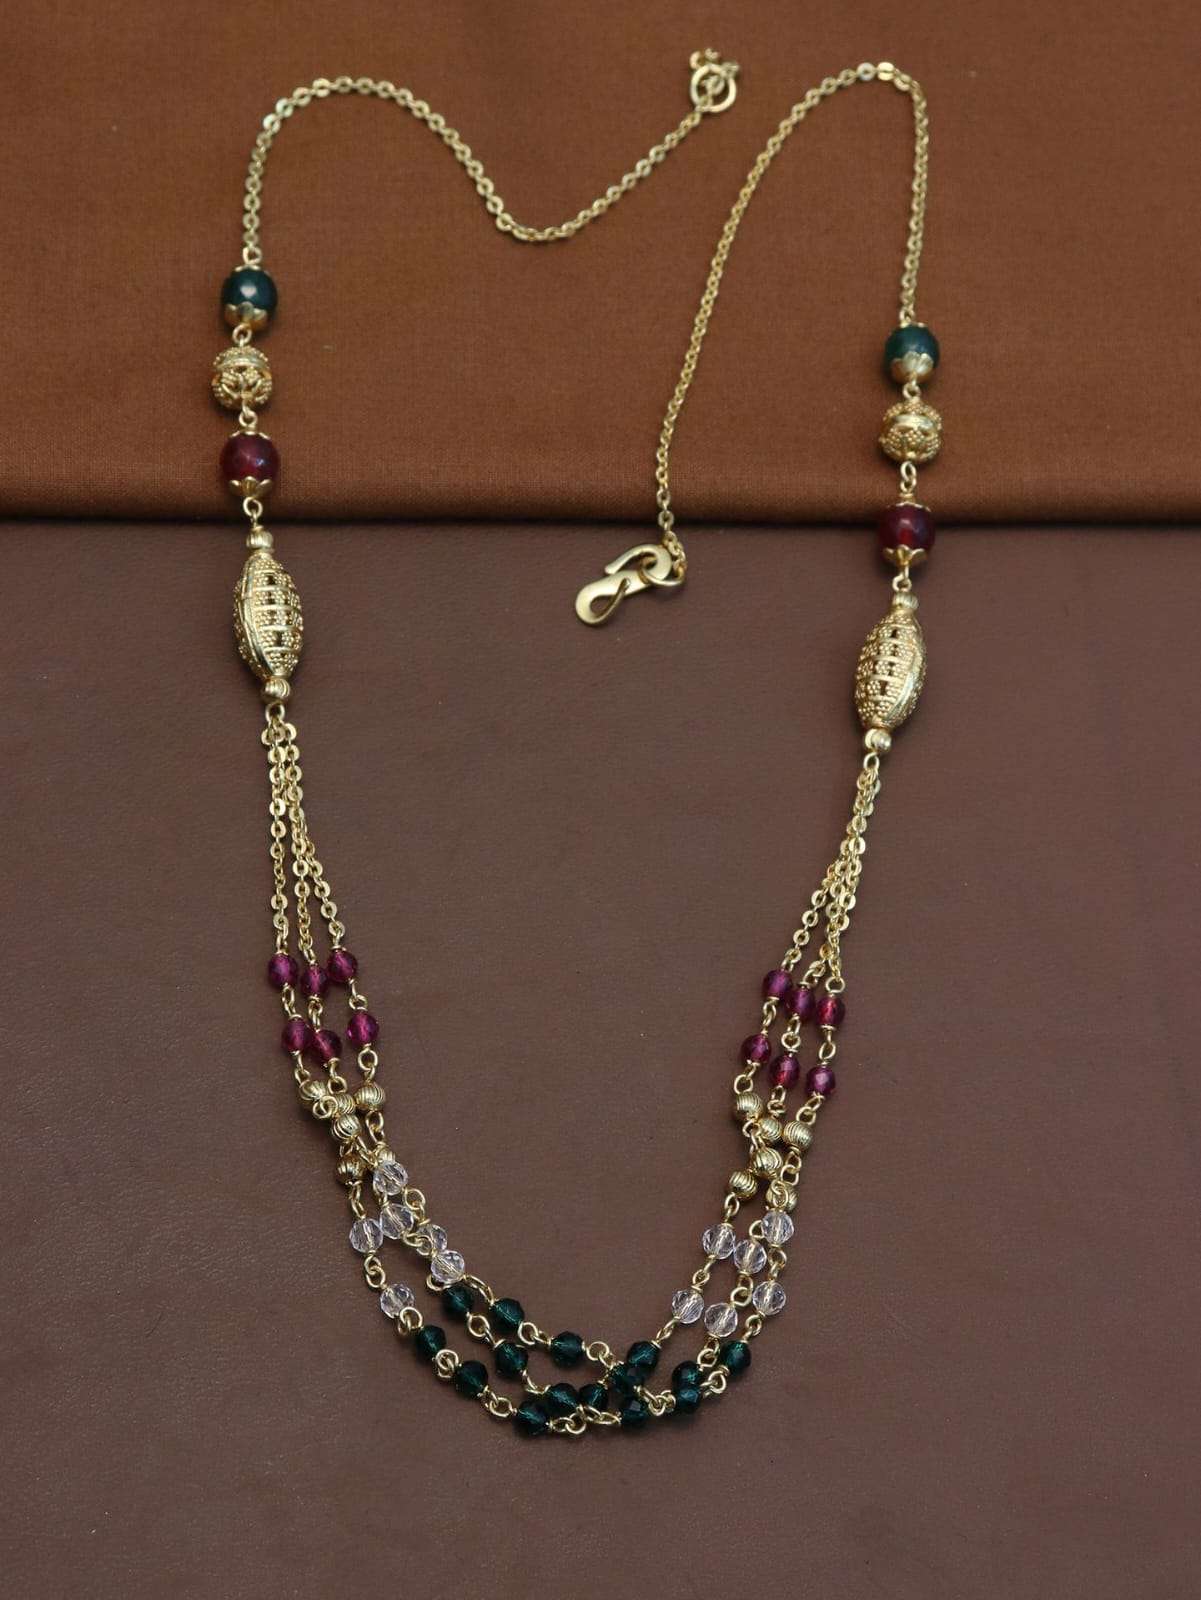 M-982 BY FASHID WHOLESALE TRADITIONAL IMITATION JEWELLERY FOR INDIAN ATTIRE AT EXCLUSIVE RANGE.